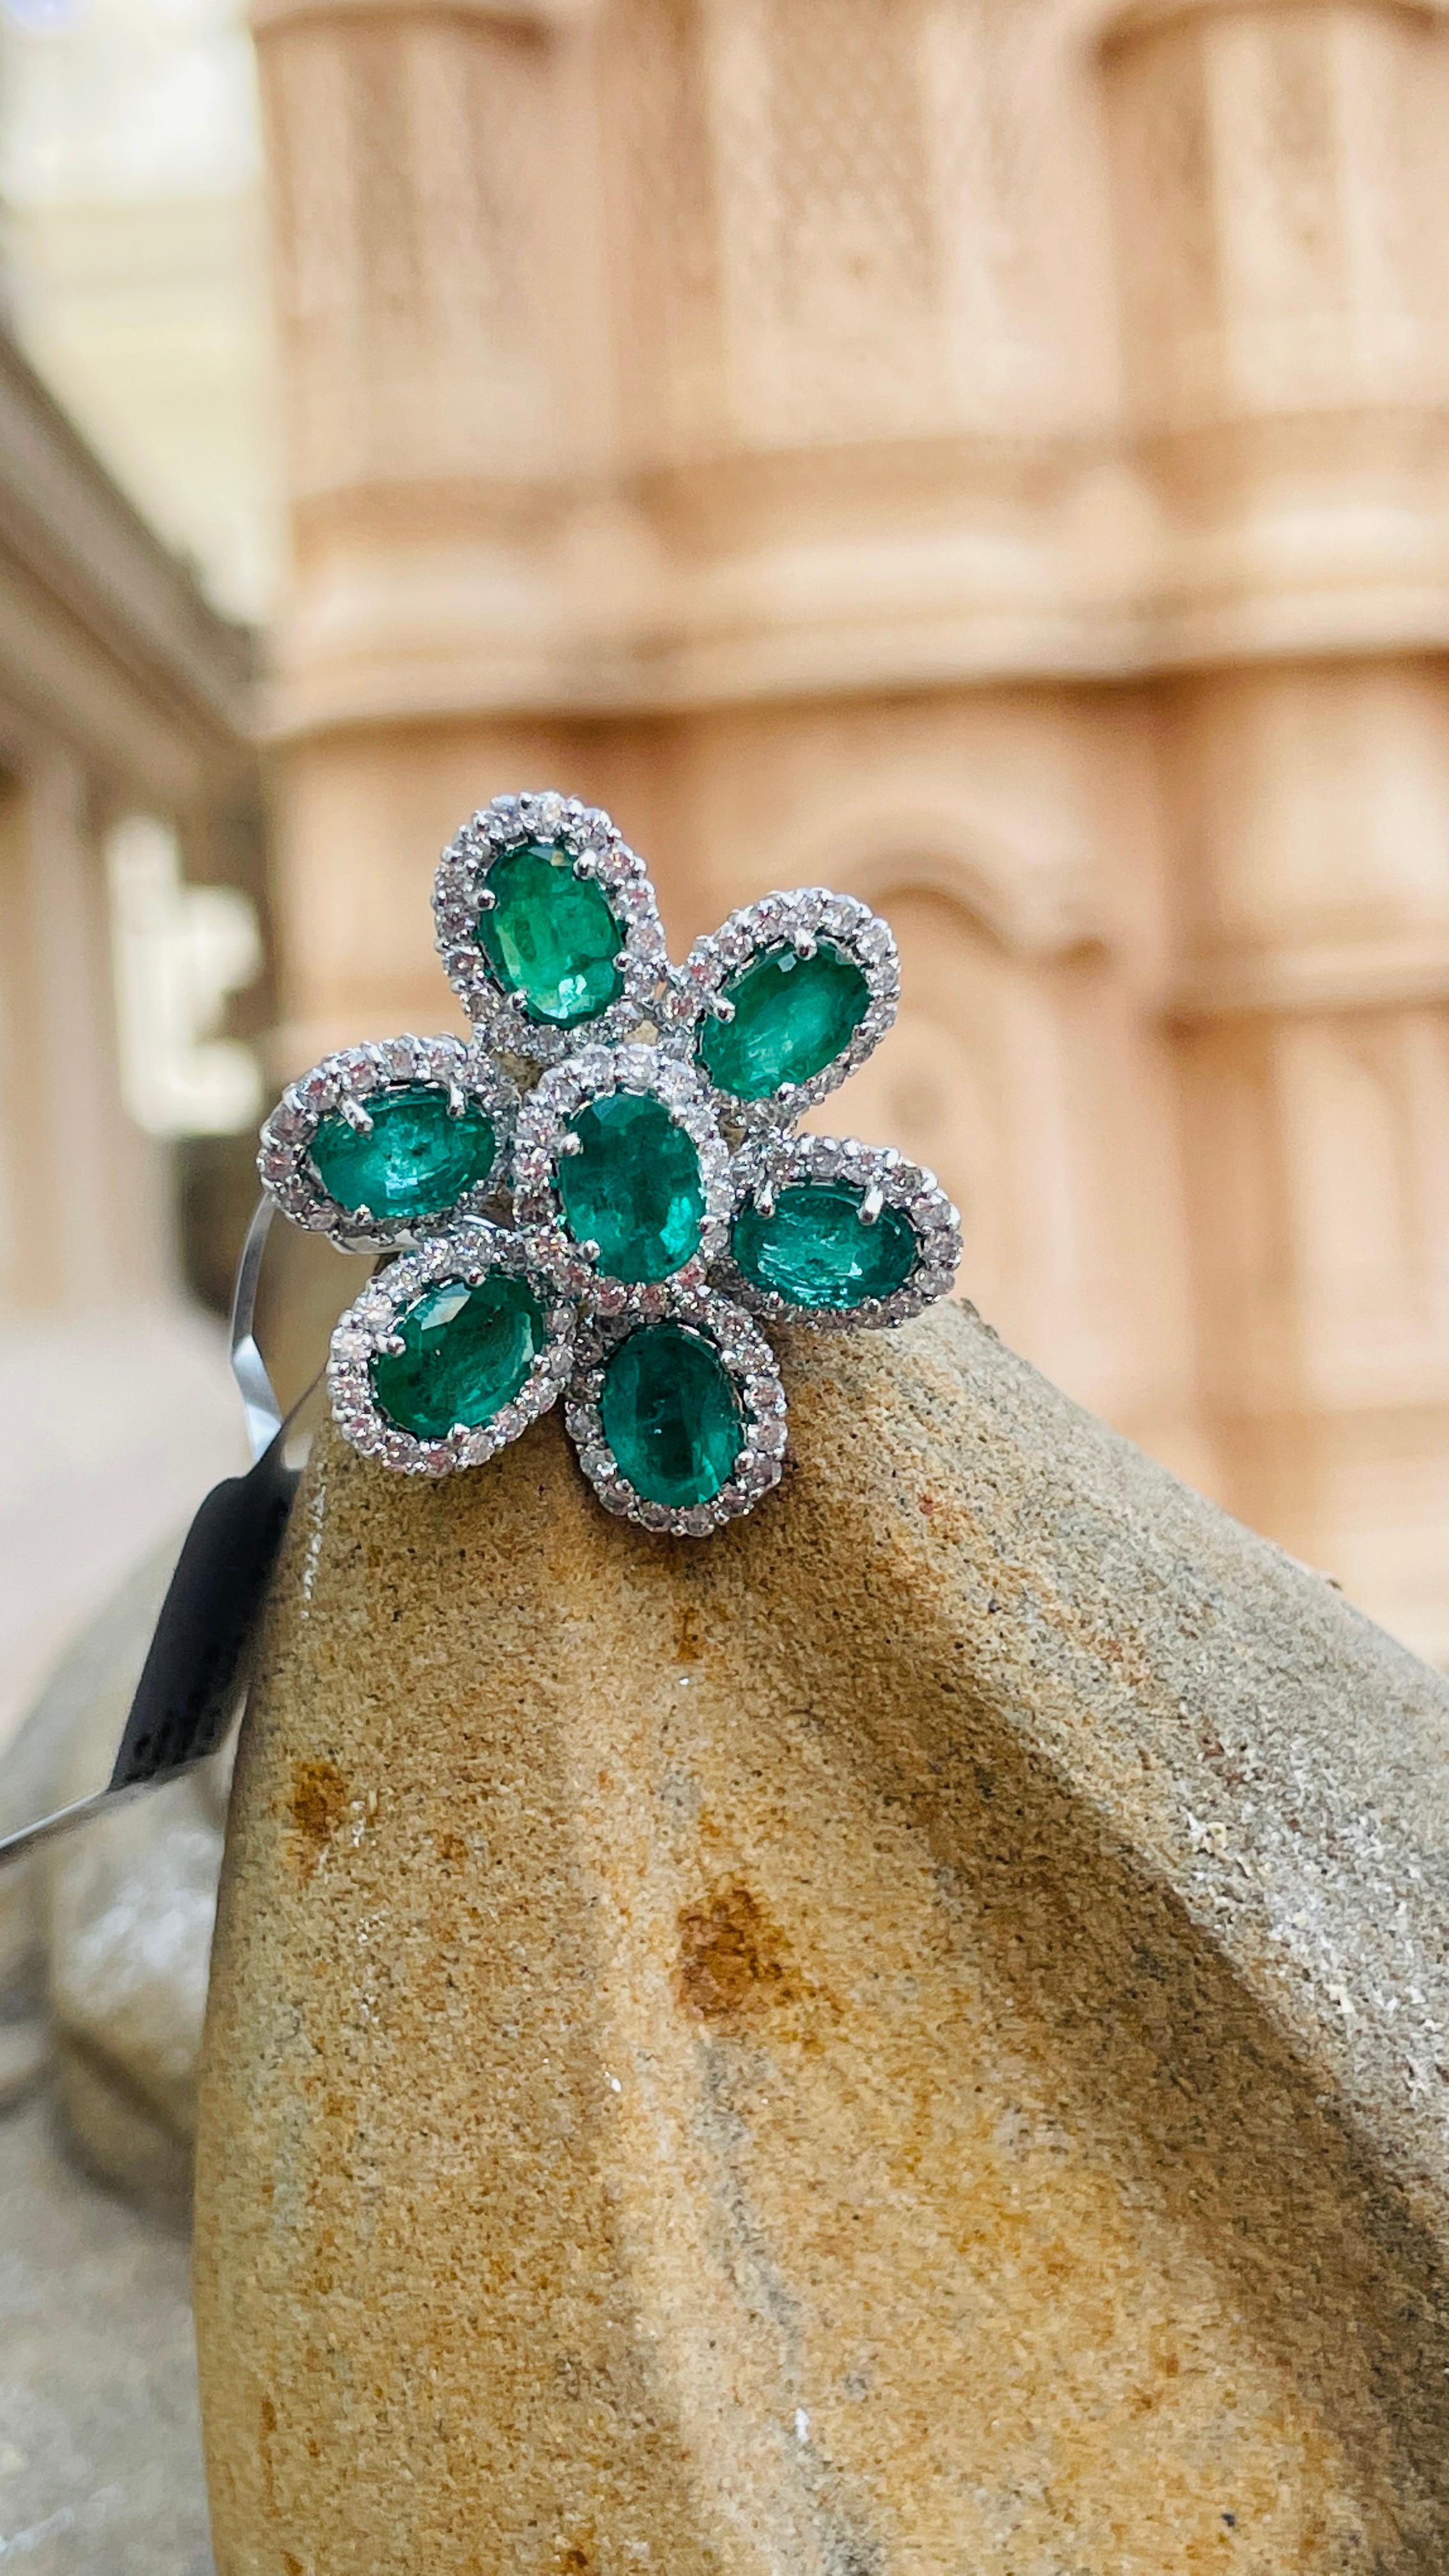 For Sale:  Statement 5 ct Emerald Flower Ring with Halo Diamonds in 14 Karat White Gold 2